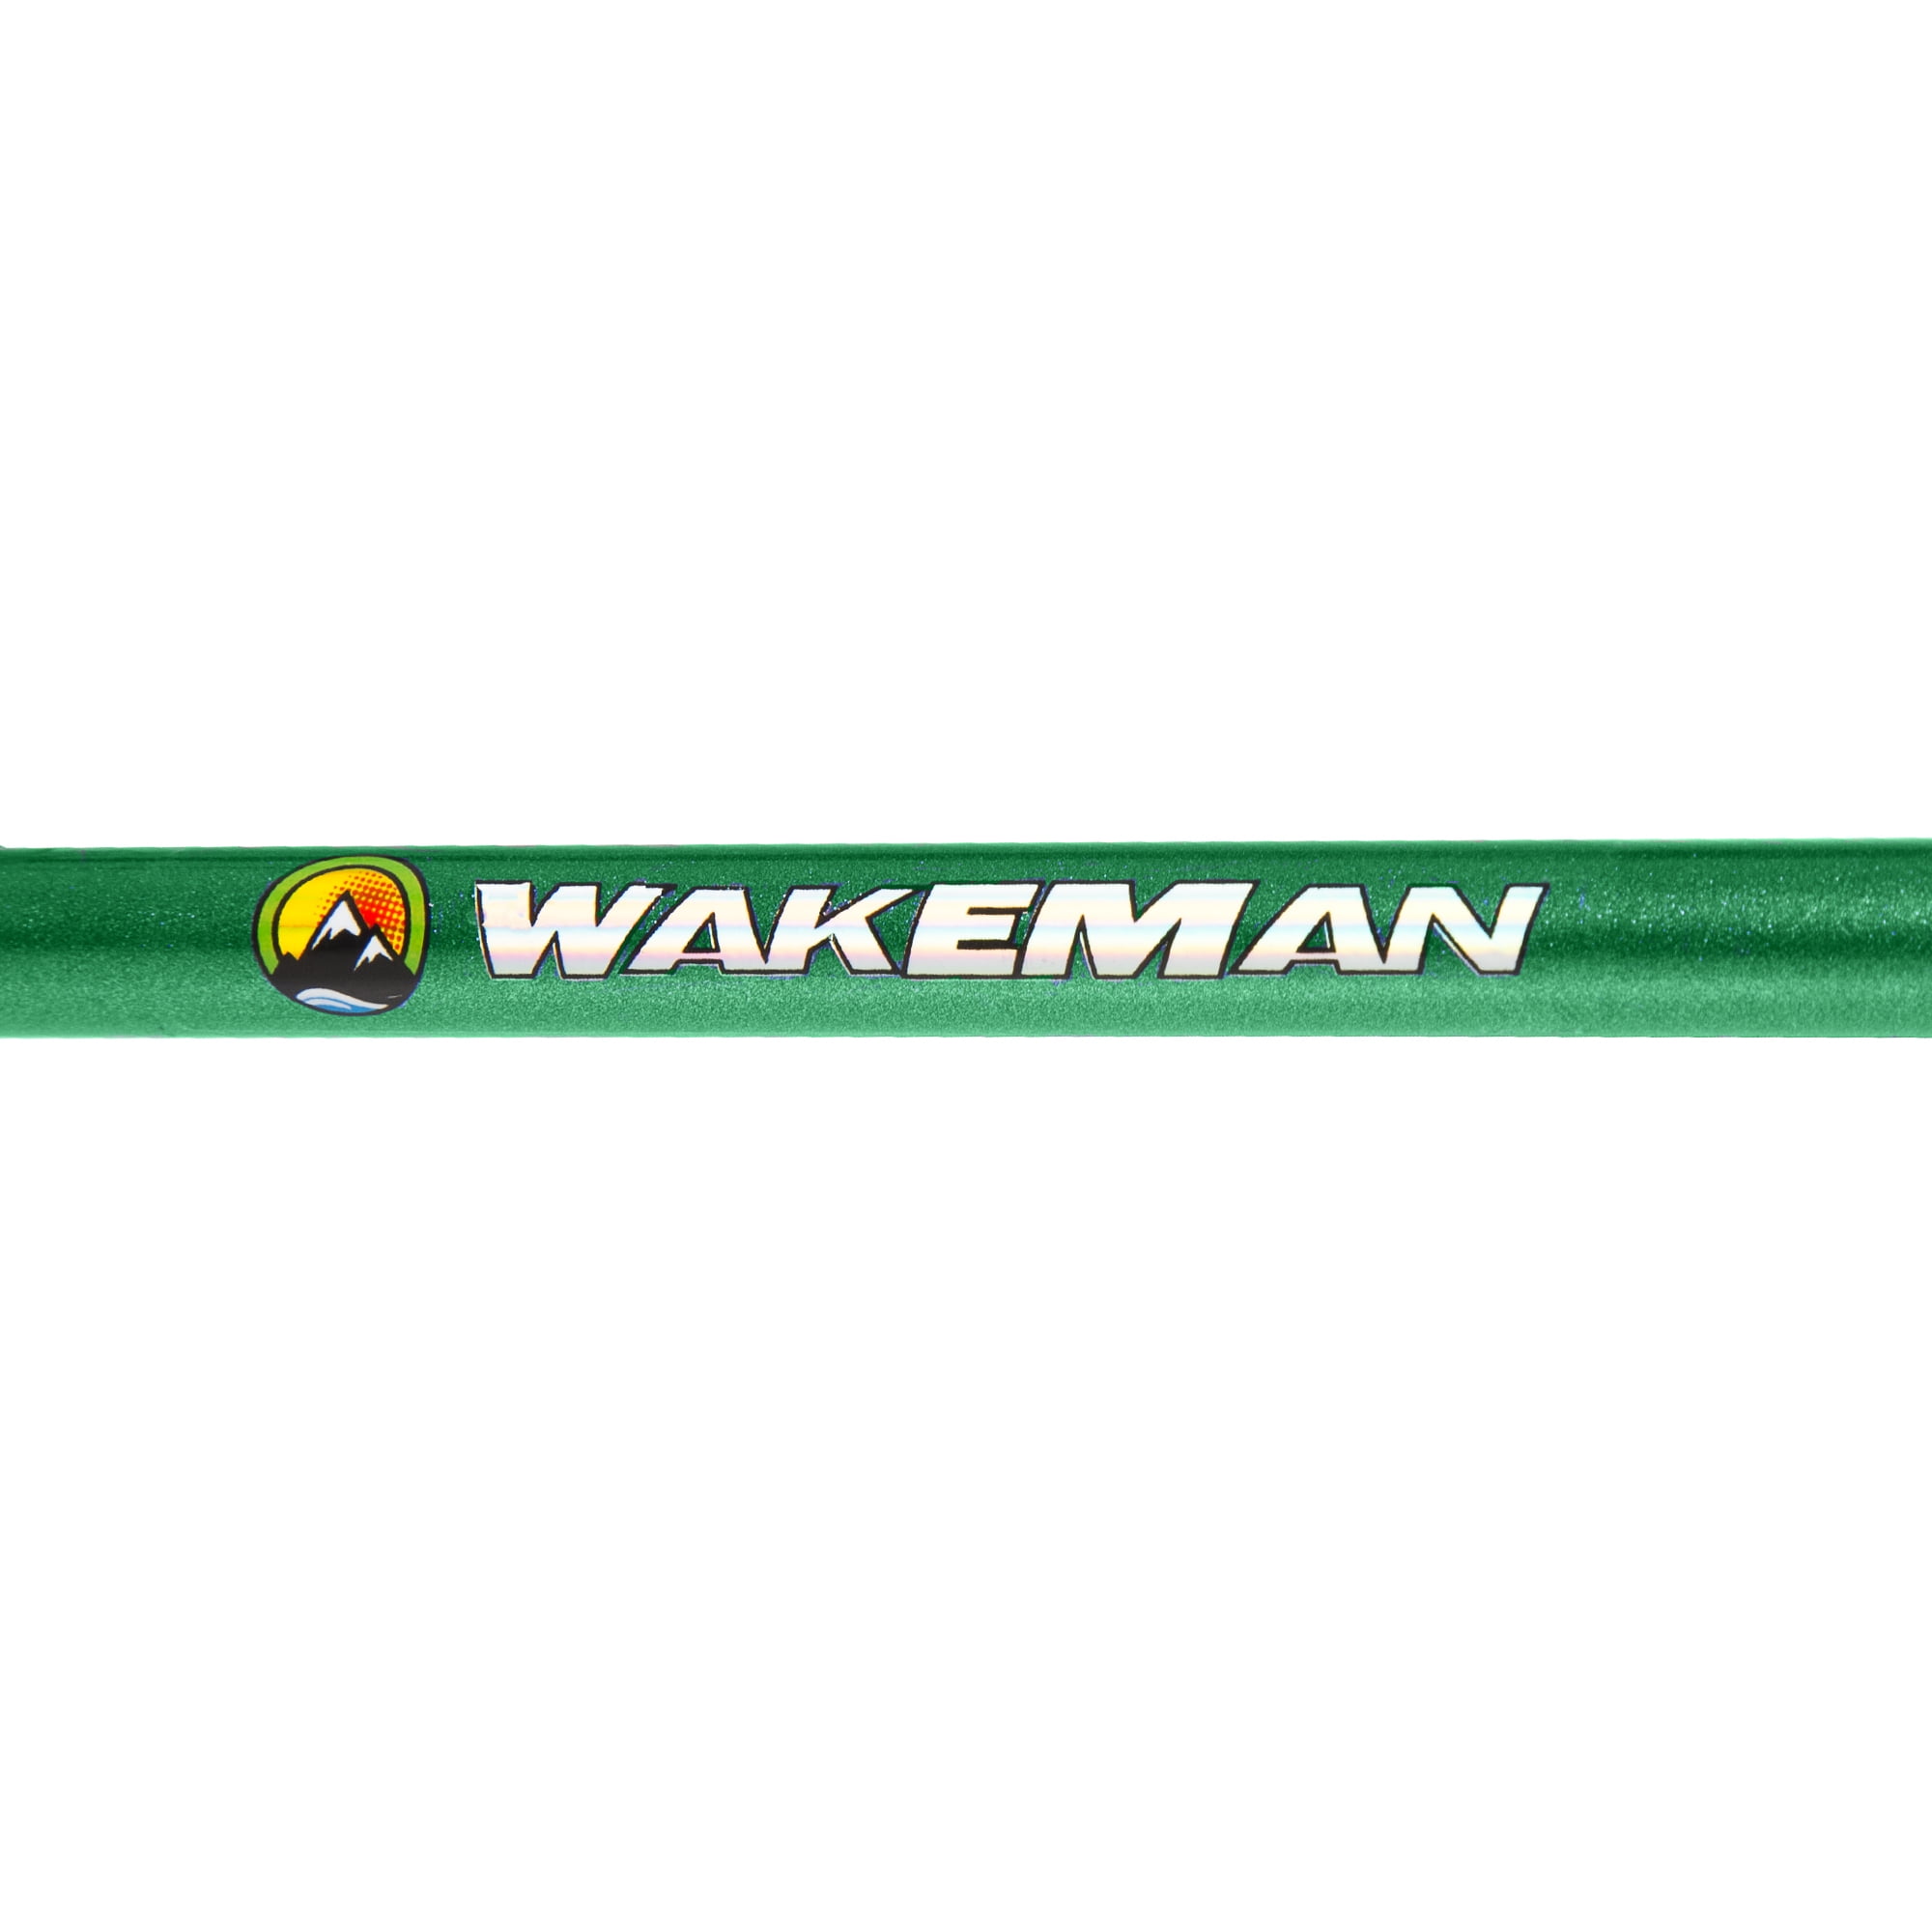  Fiberglass Fishing Pole - Strike Series Collapsible Rod and  Spinning Reel Combo Gear for Catching Walleye, Bass, Trout, and More by  Wakeman (Black) : Sports & Outdoors